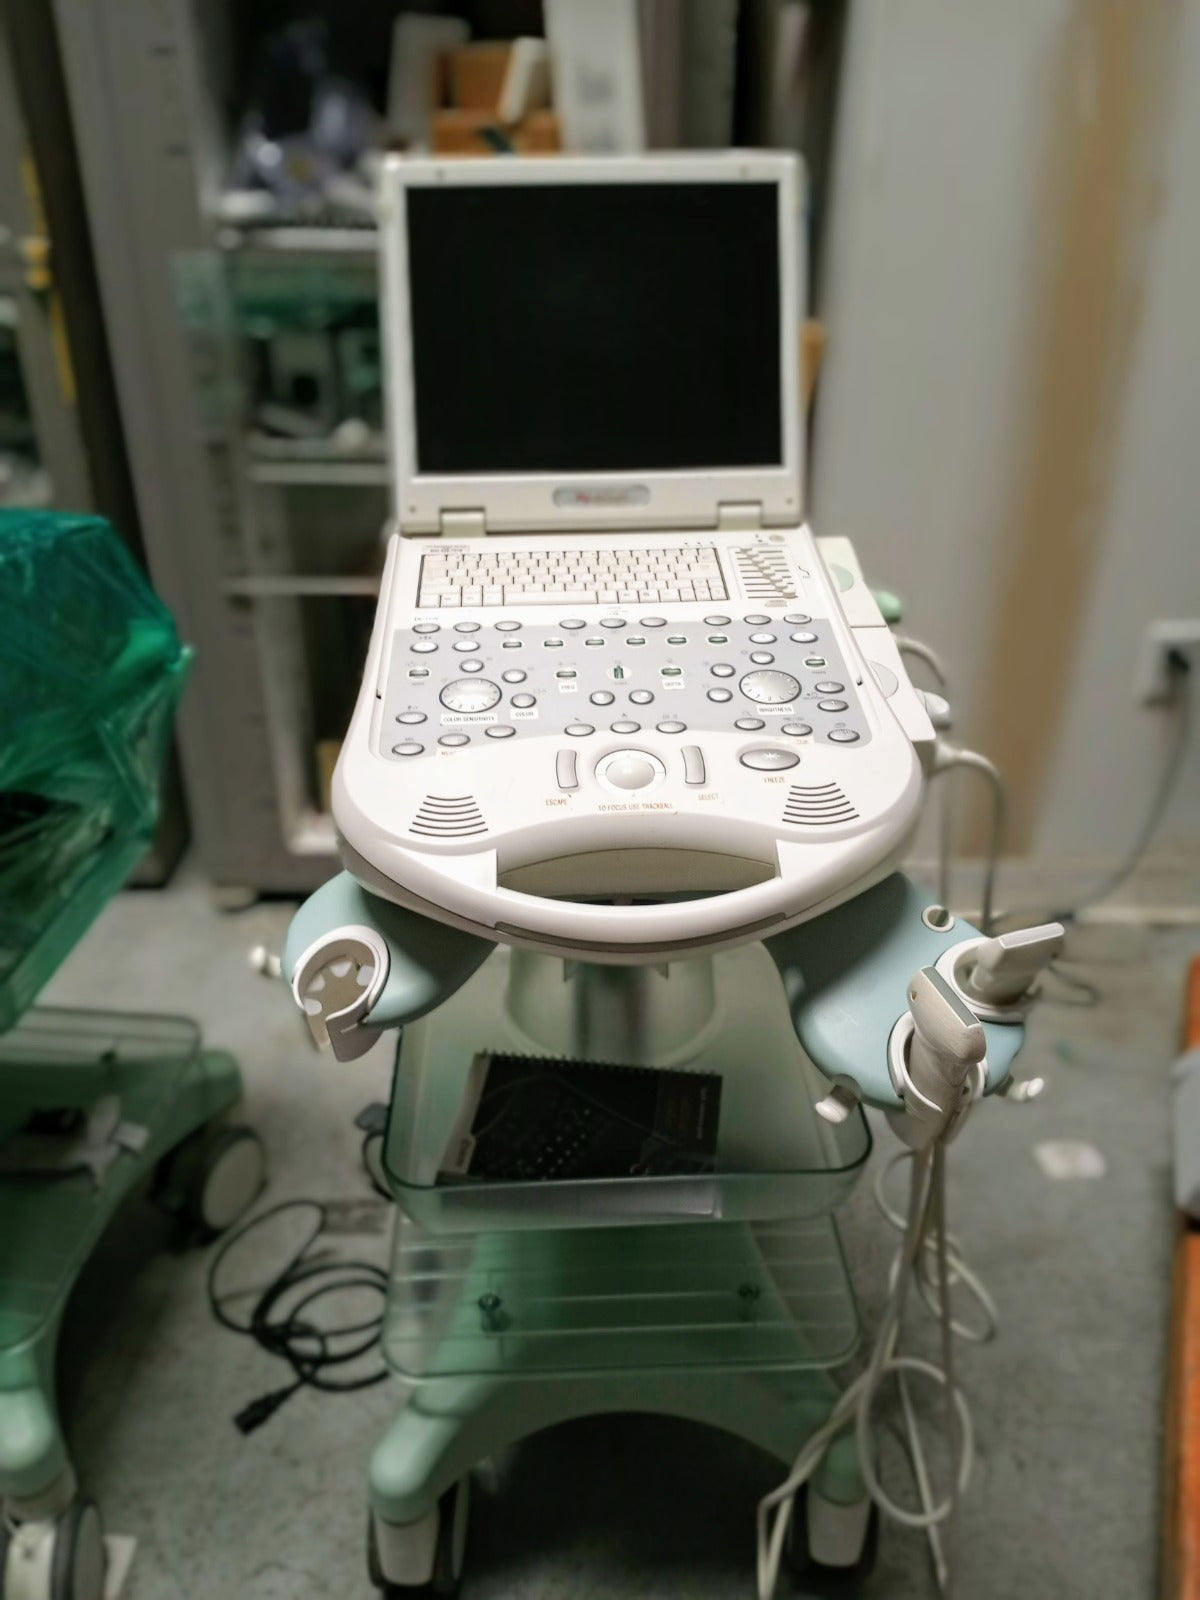 Esaote MyLab 25Gold Ultrasound Machine with 4D Volumetric and Doppler Color